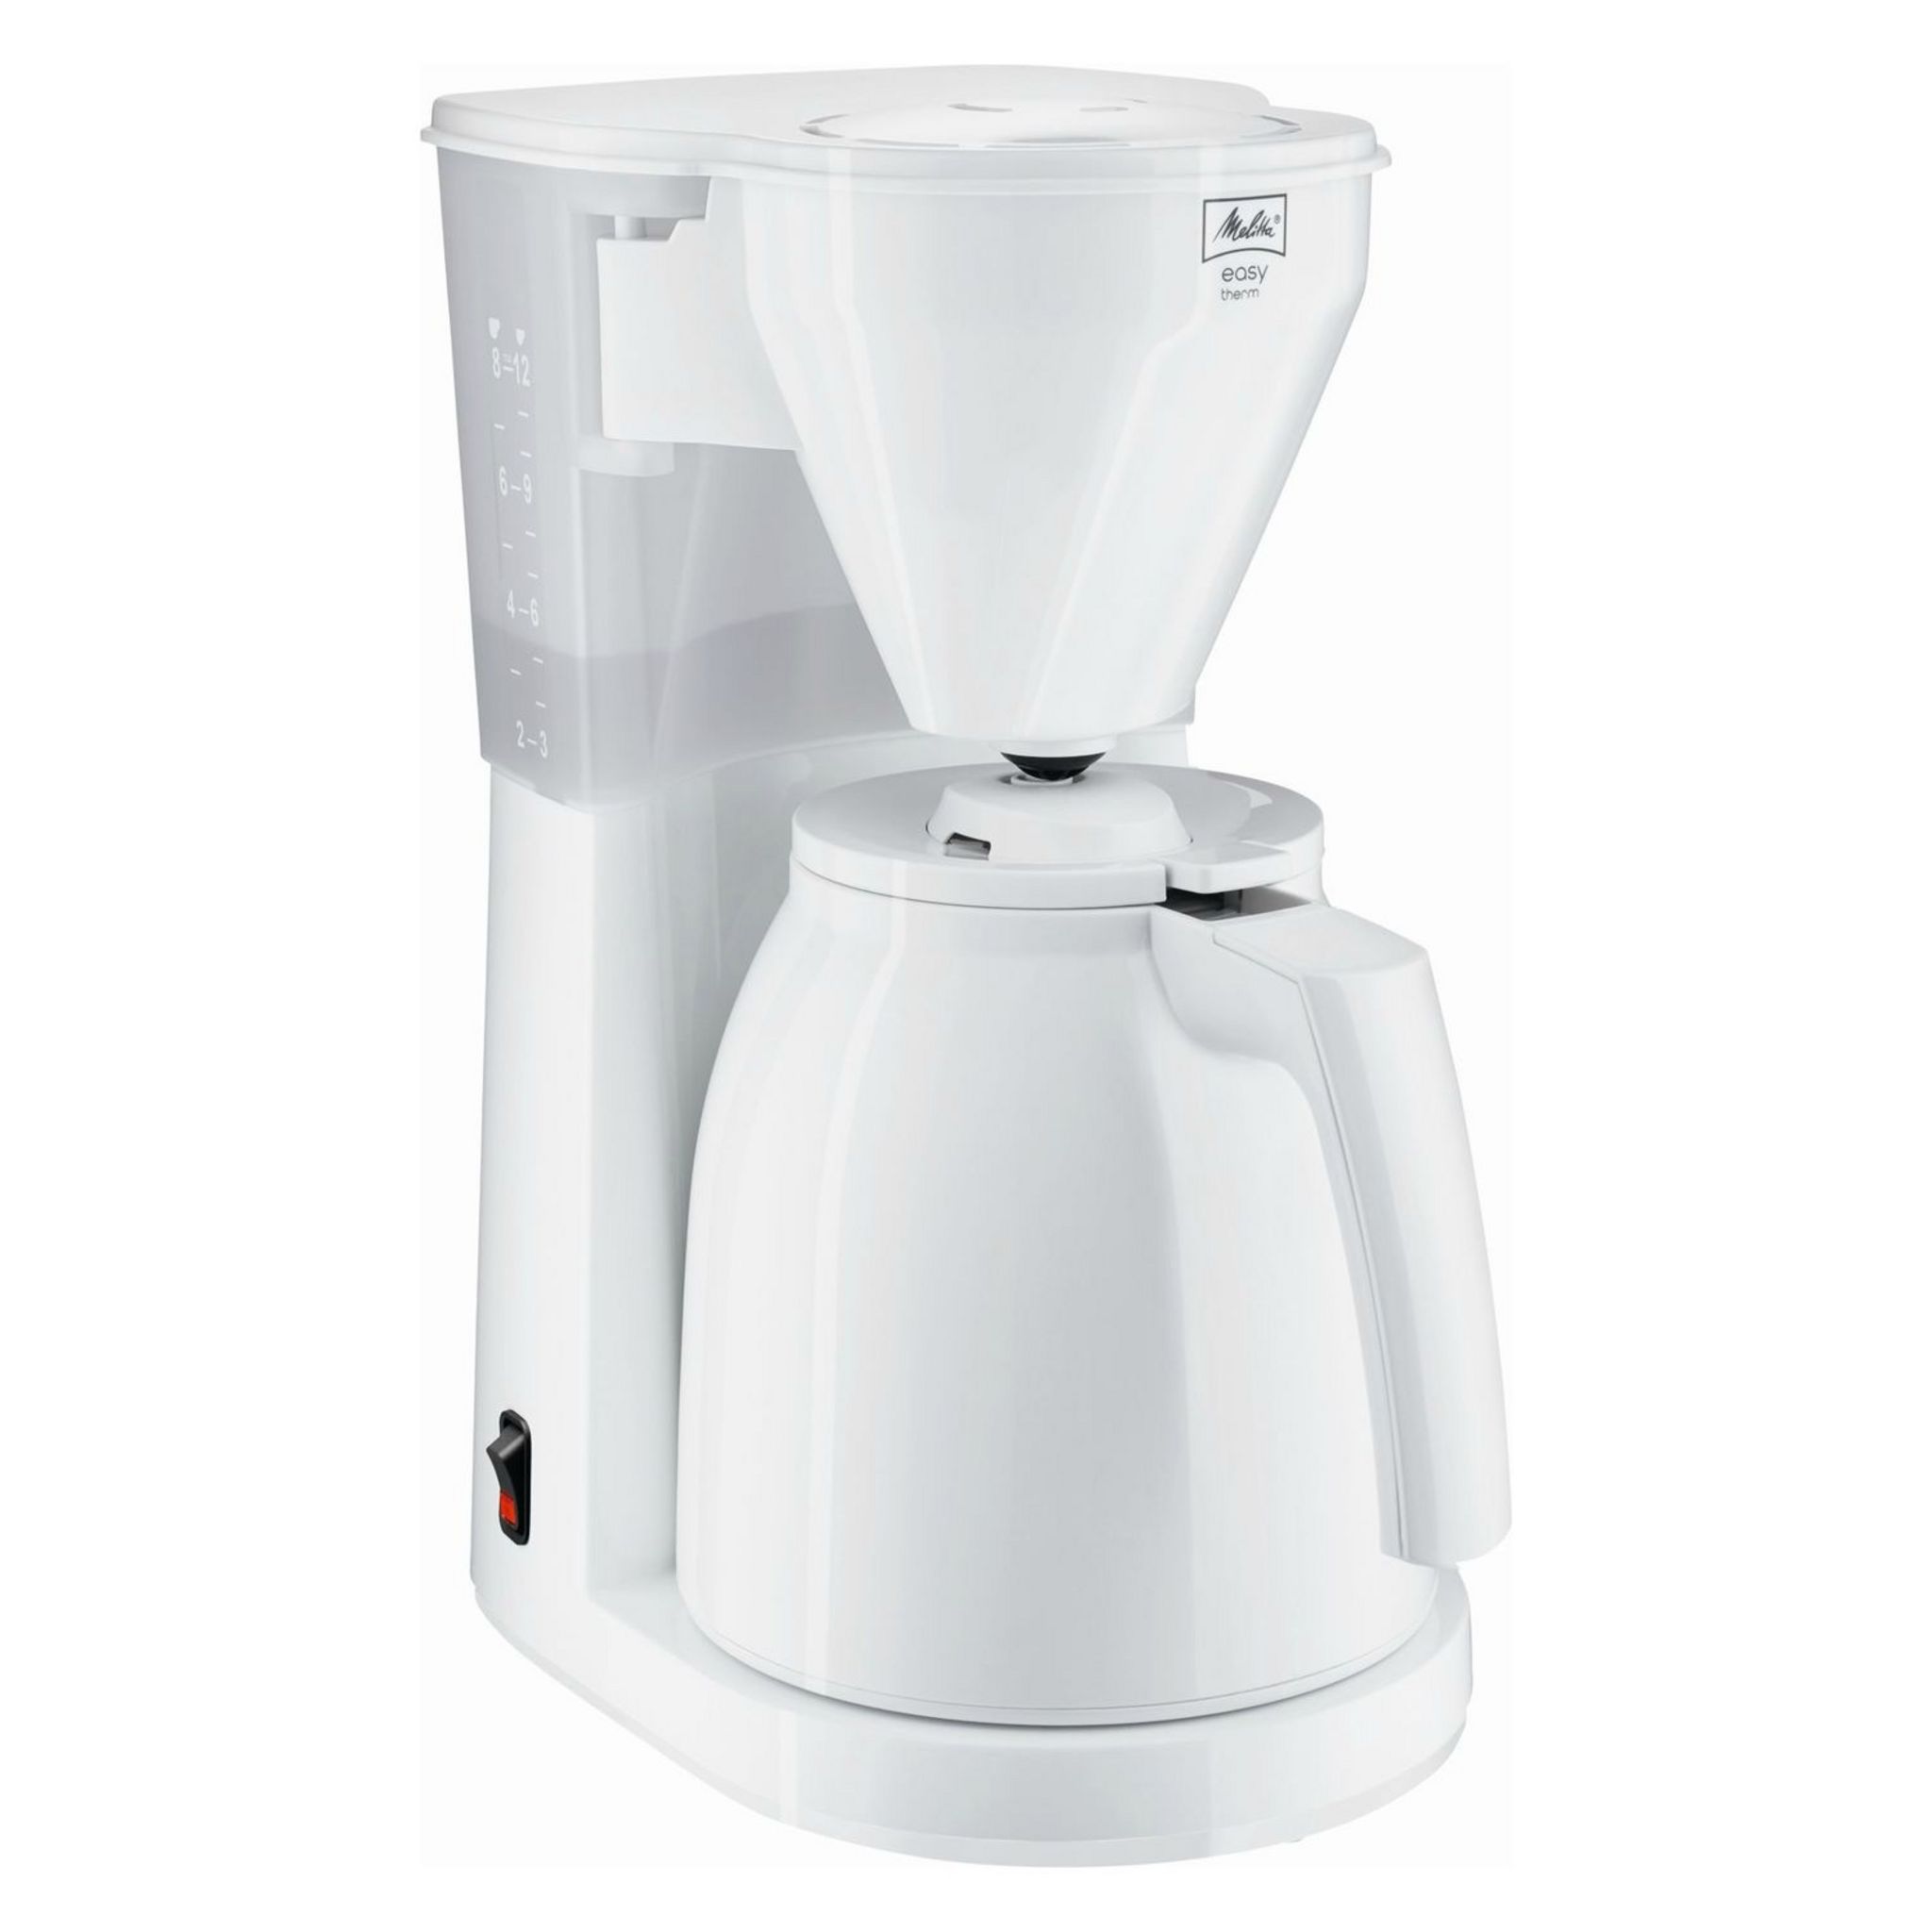 Melitta Cafetière EASY II THERM, blanc